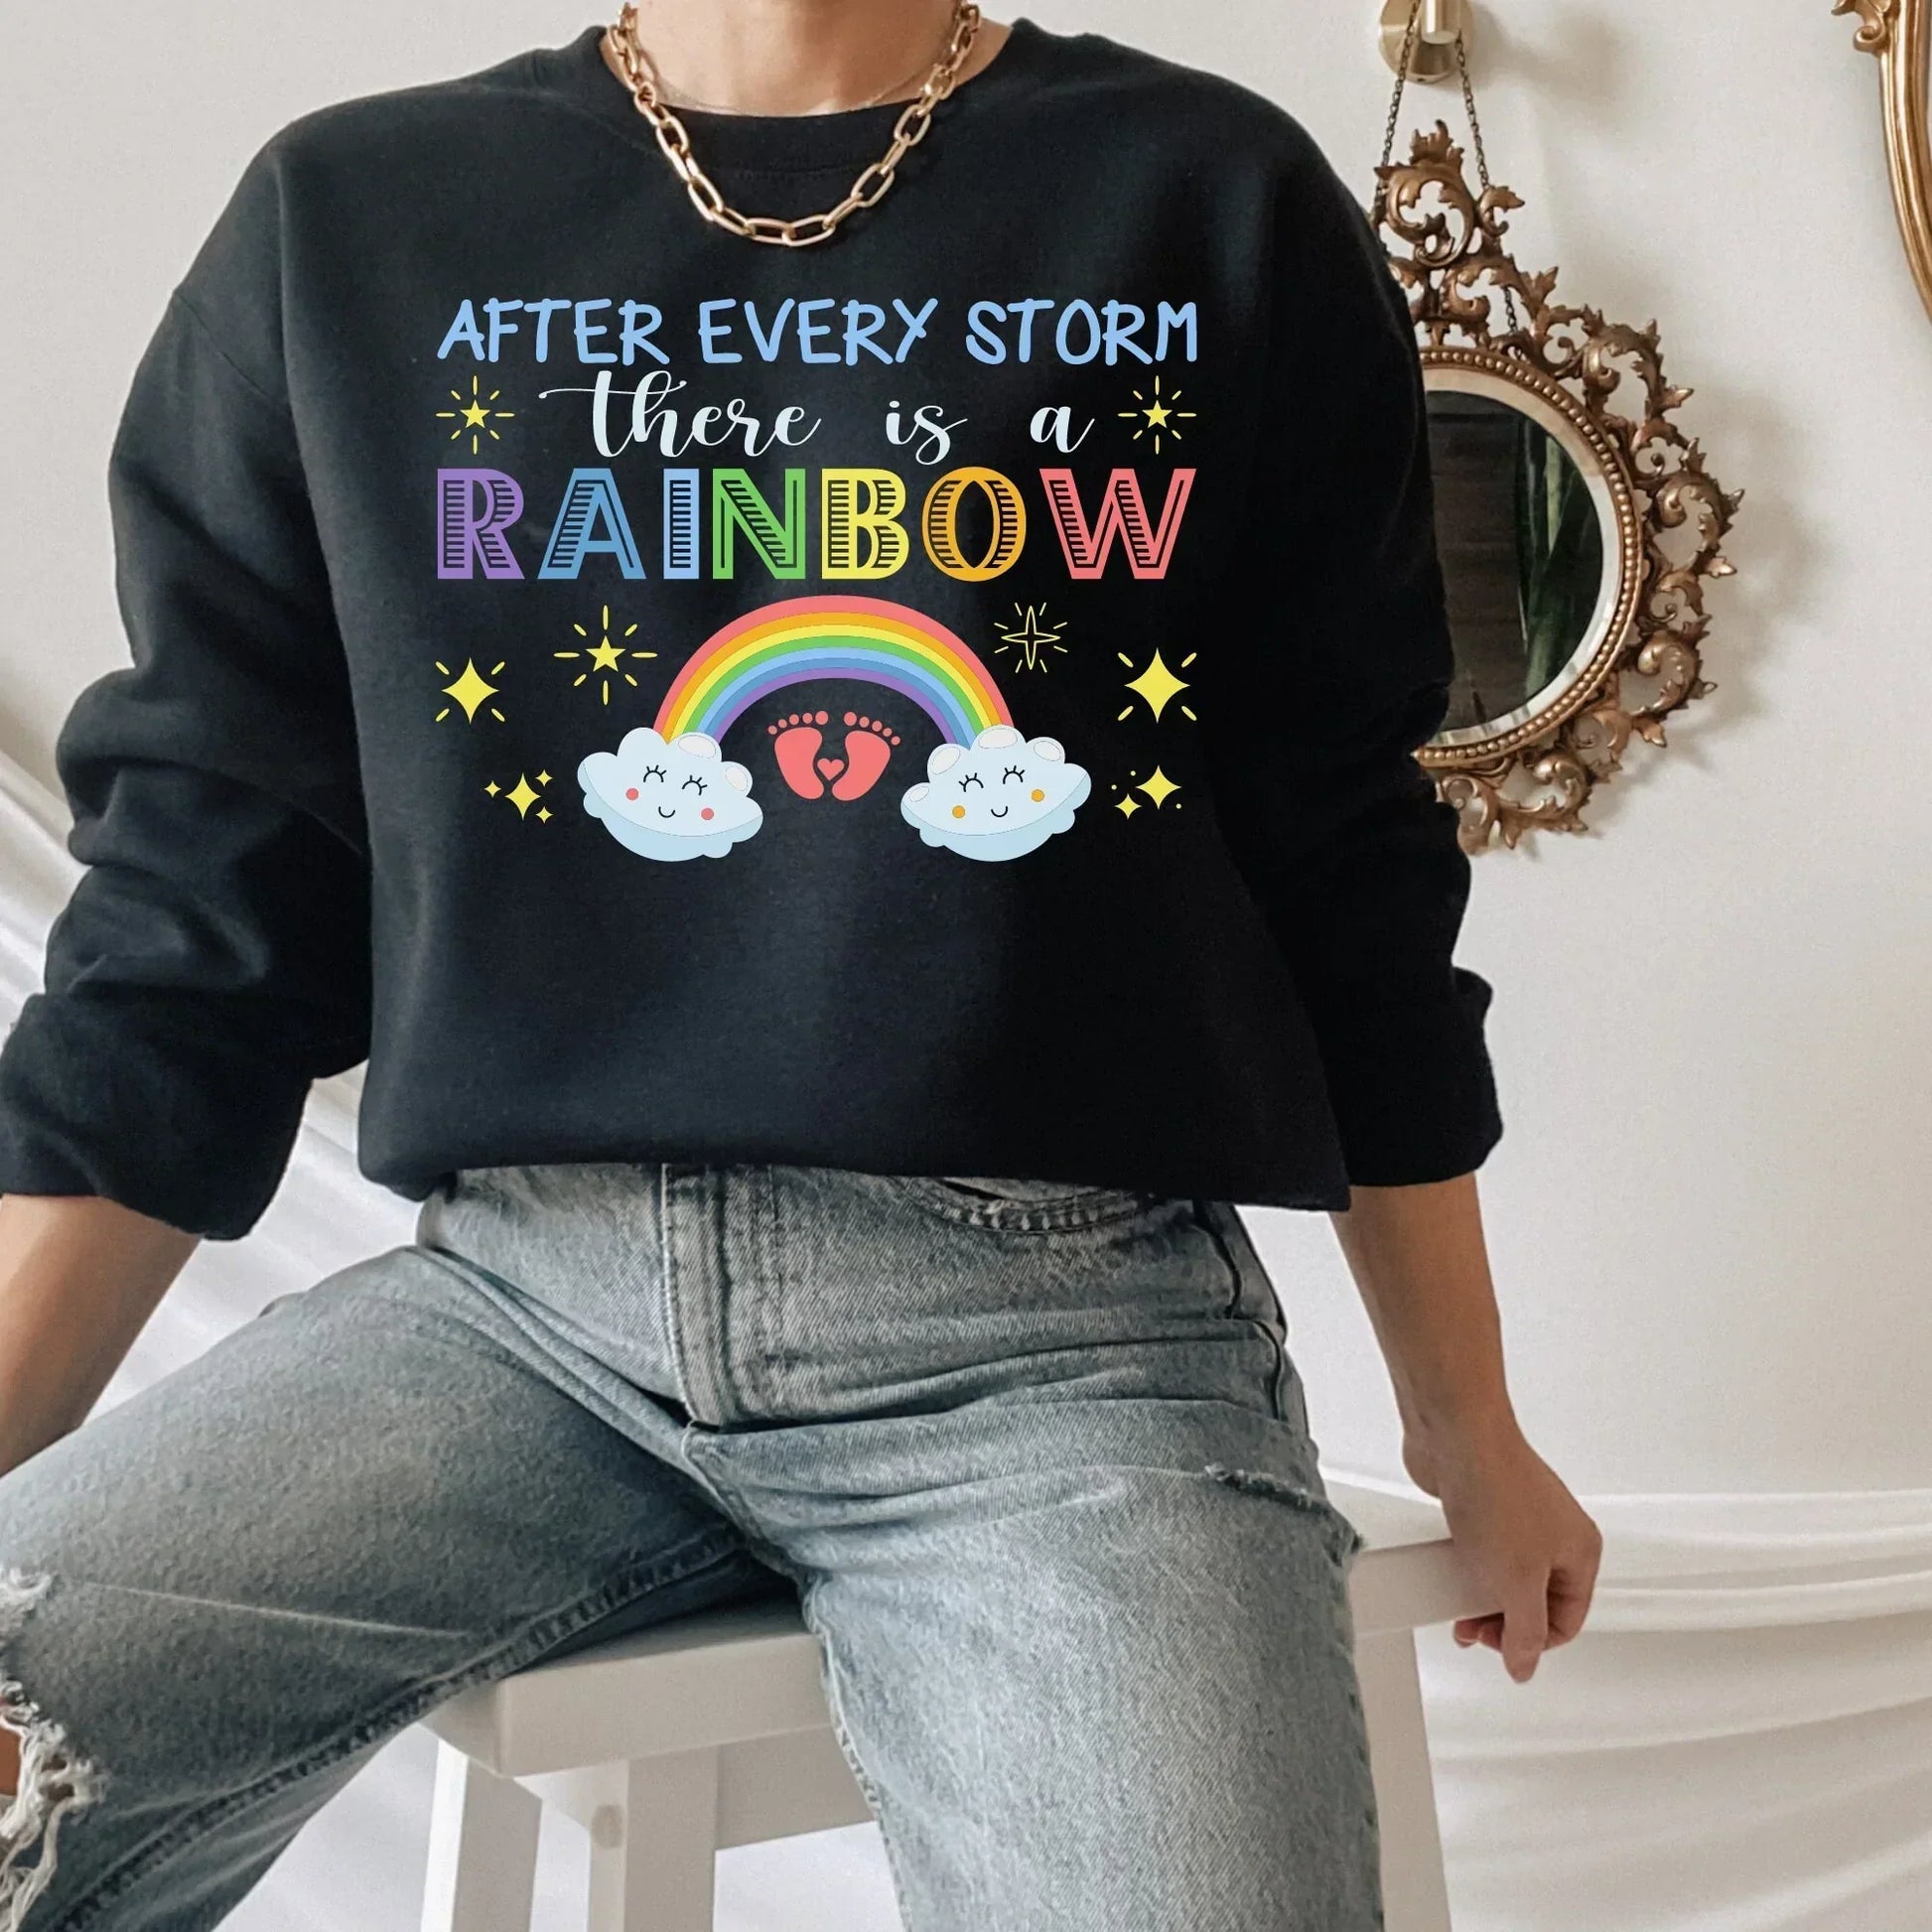 Pregnancy sweatshirt, Maternity shirt, Rainbow Pregnancy Reveal to Husband, Soon to Be Mom, Expecting Mother Hoodie, New Baby Coming Soon HMDesignStudioUS